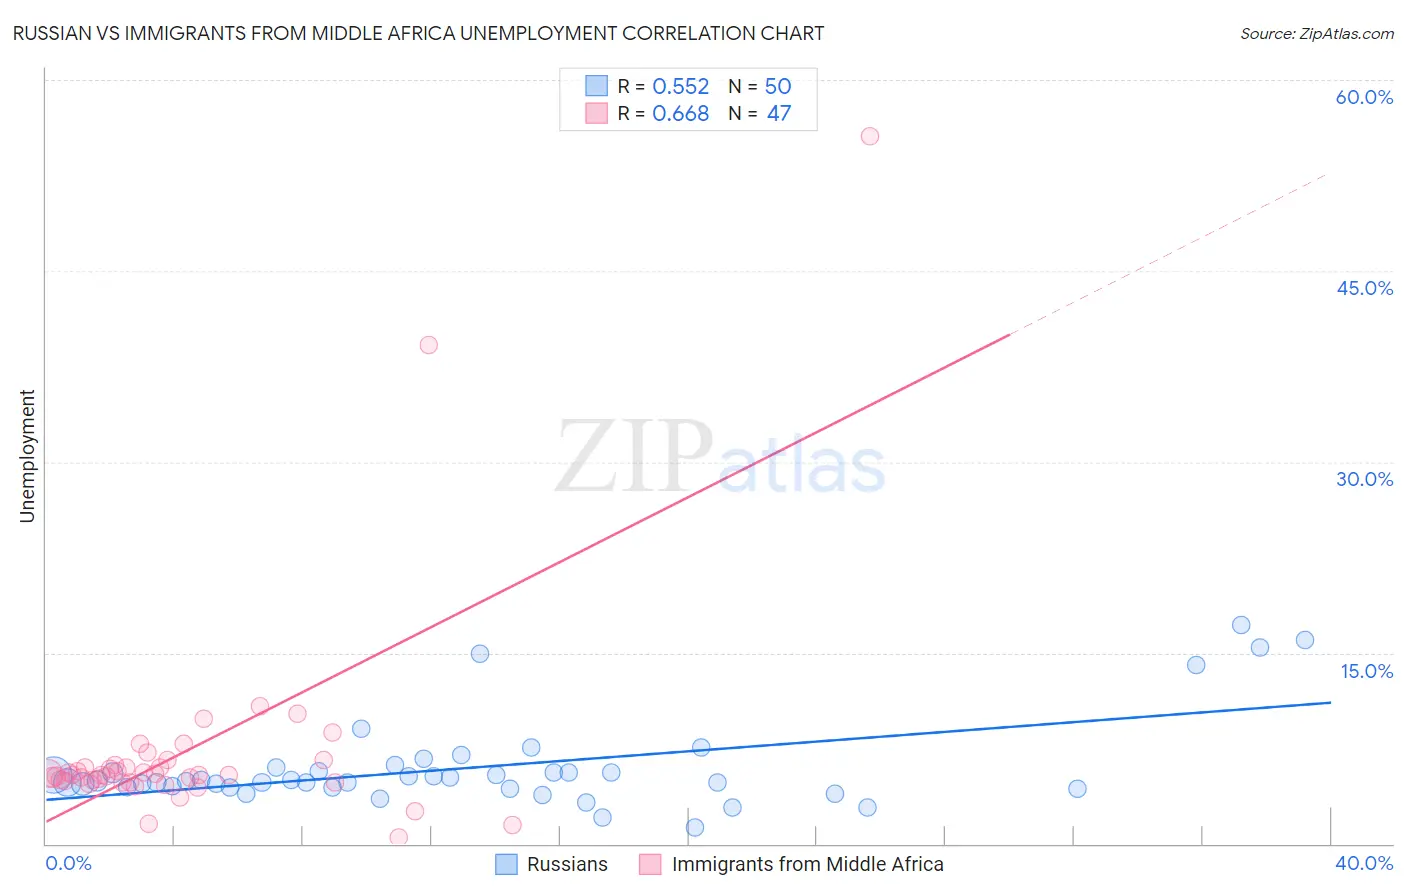 Russian vs Immigrants from Middle Africa Unemployment